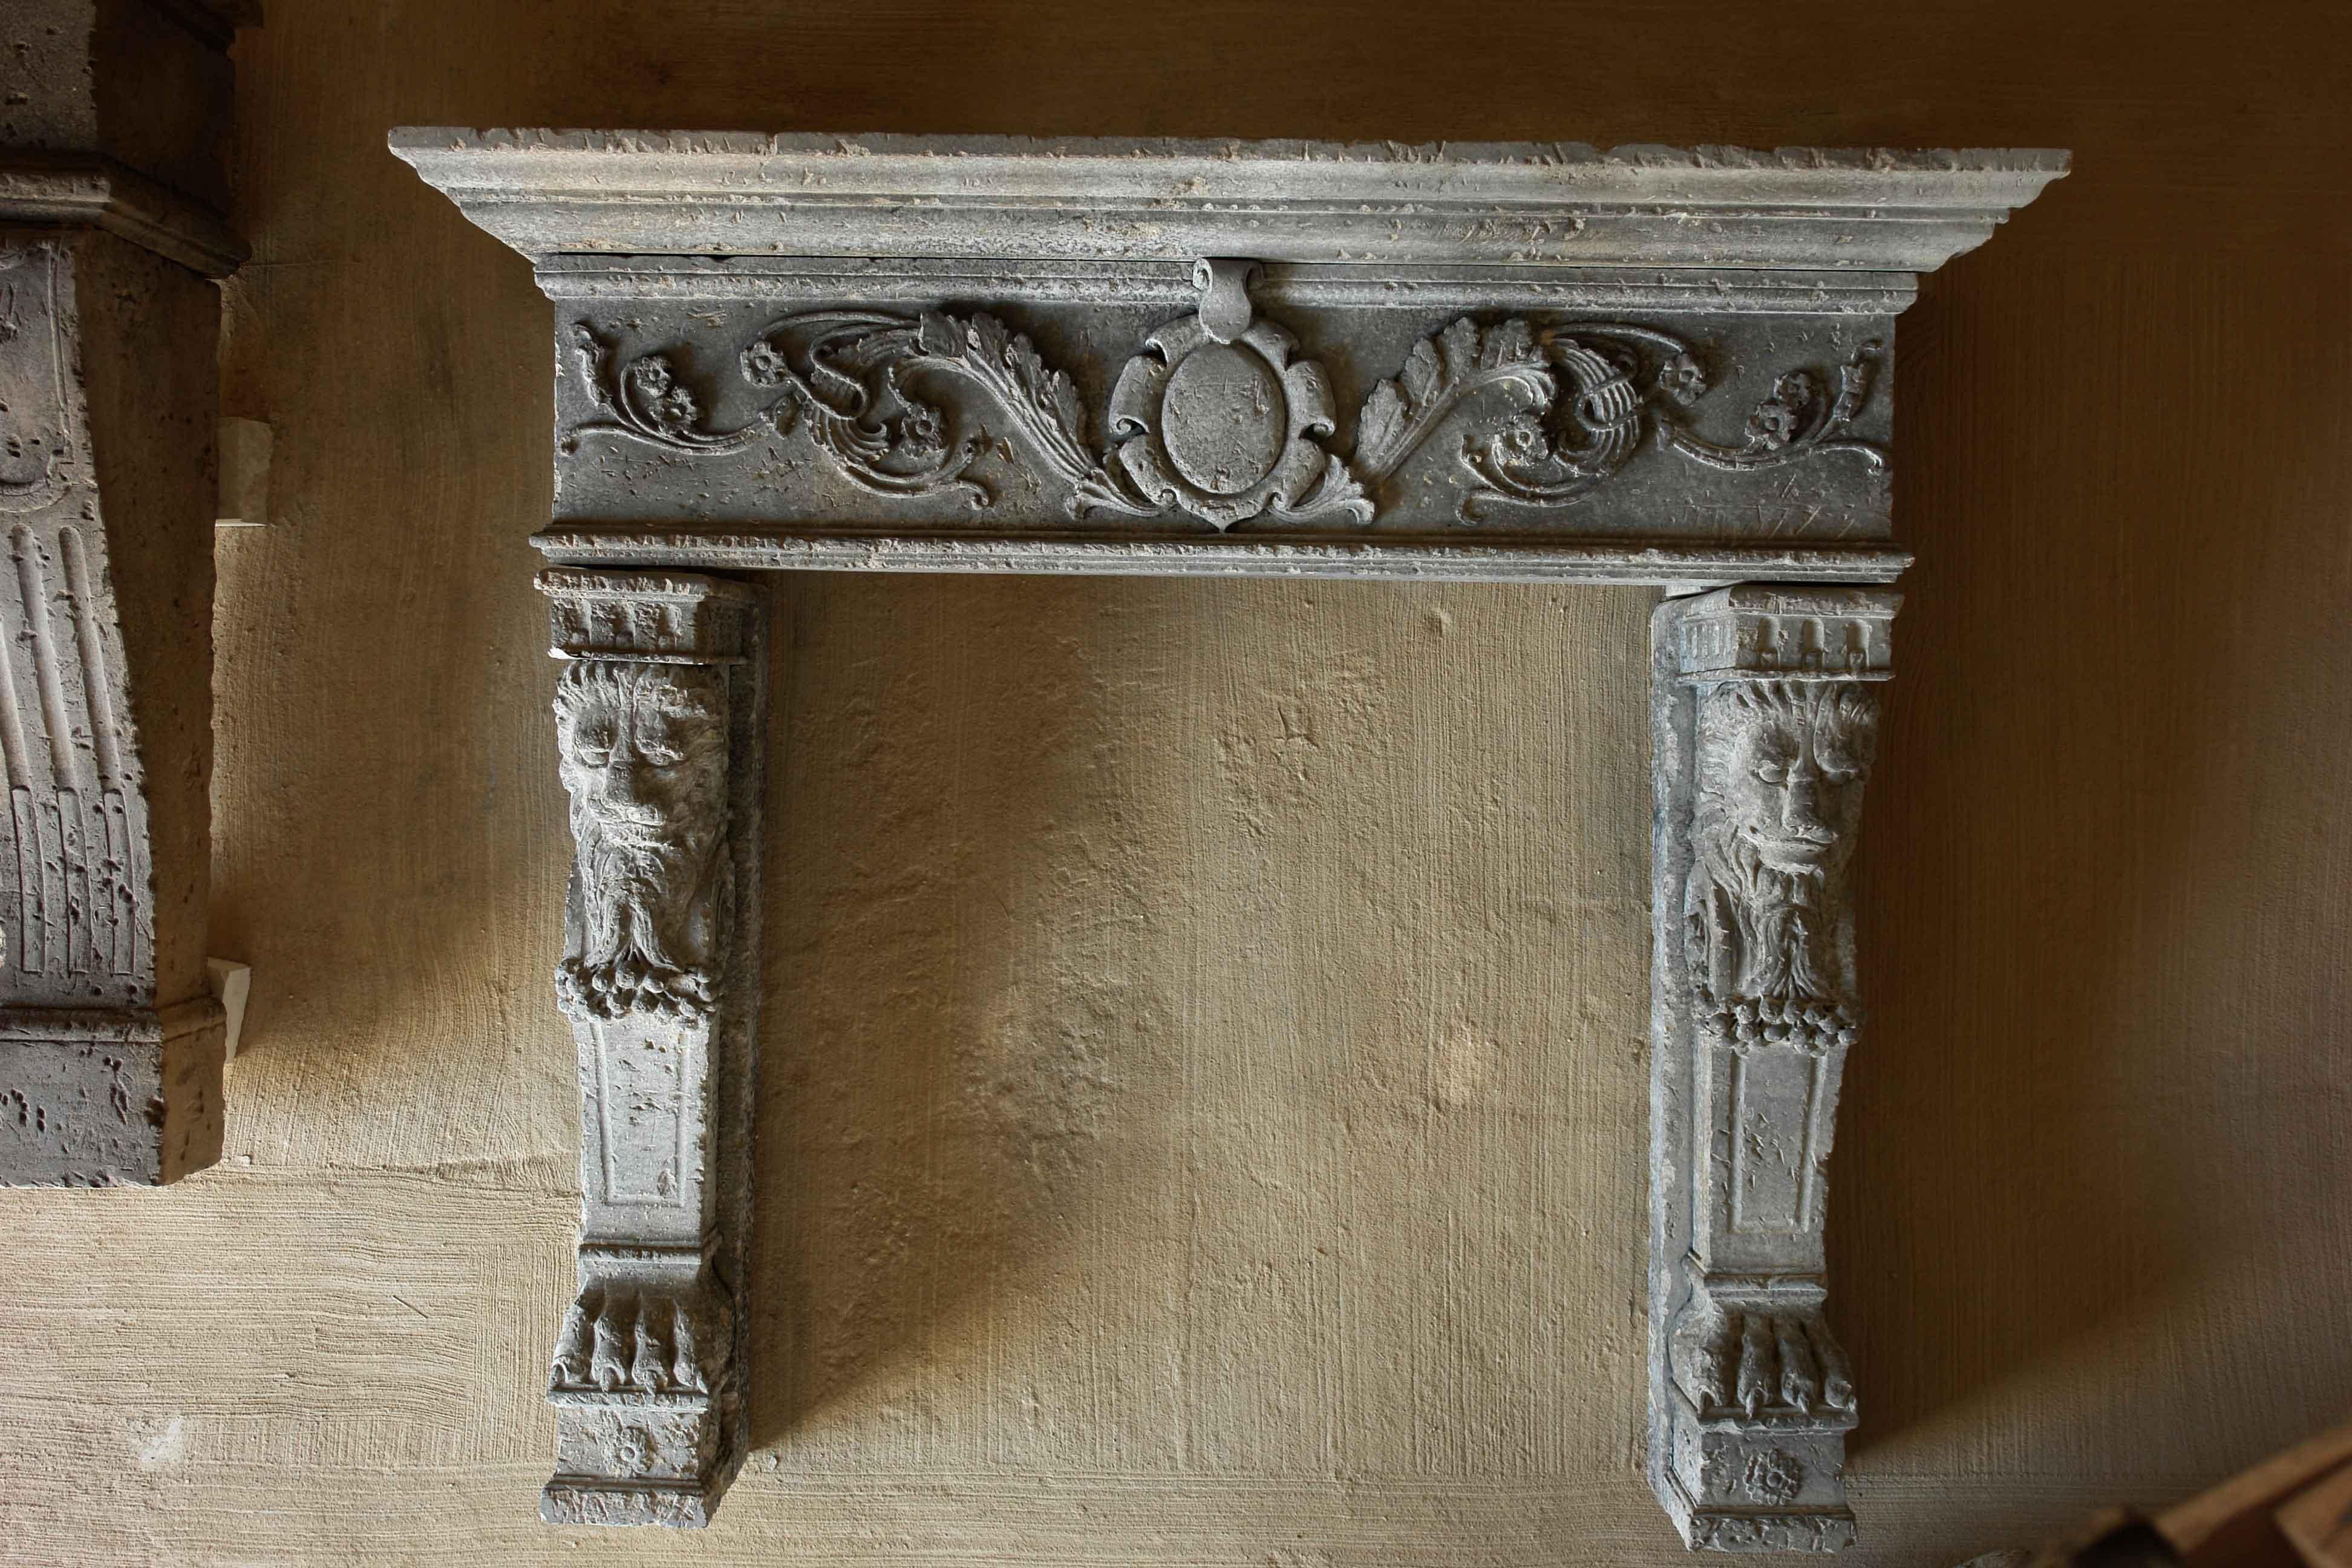 Italian Renaissance style fireplace, hand-carved in pure limestone with antique hand-finishing.
Art work with tradition. Lions on side of the leg, volutes and grapes around, acanthus leaves with medallion on front of mantel.
Deep details of the